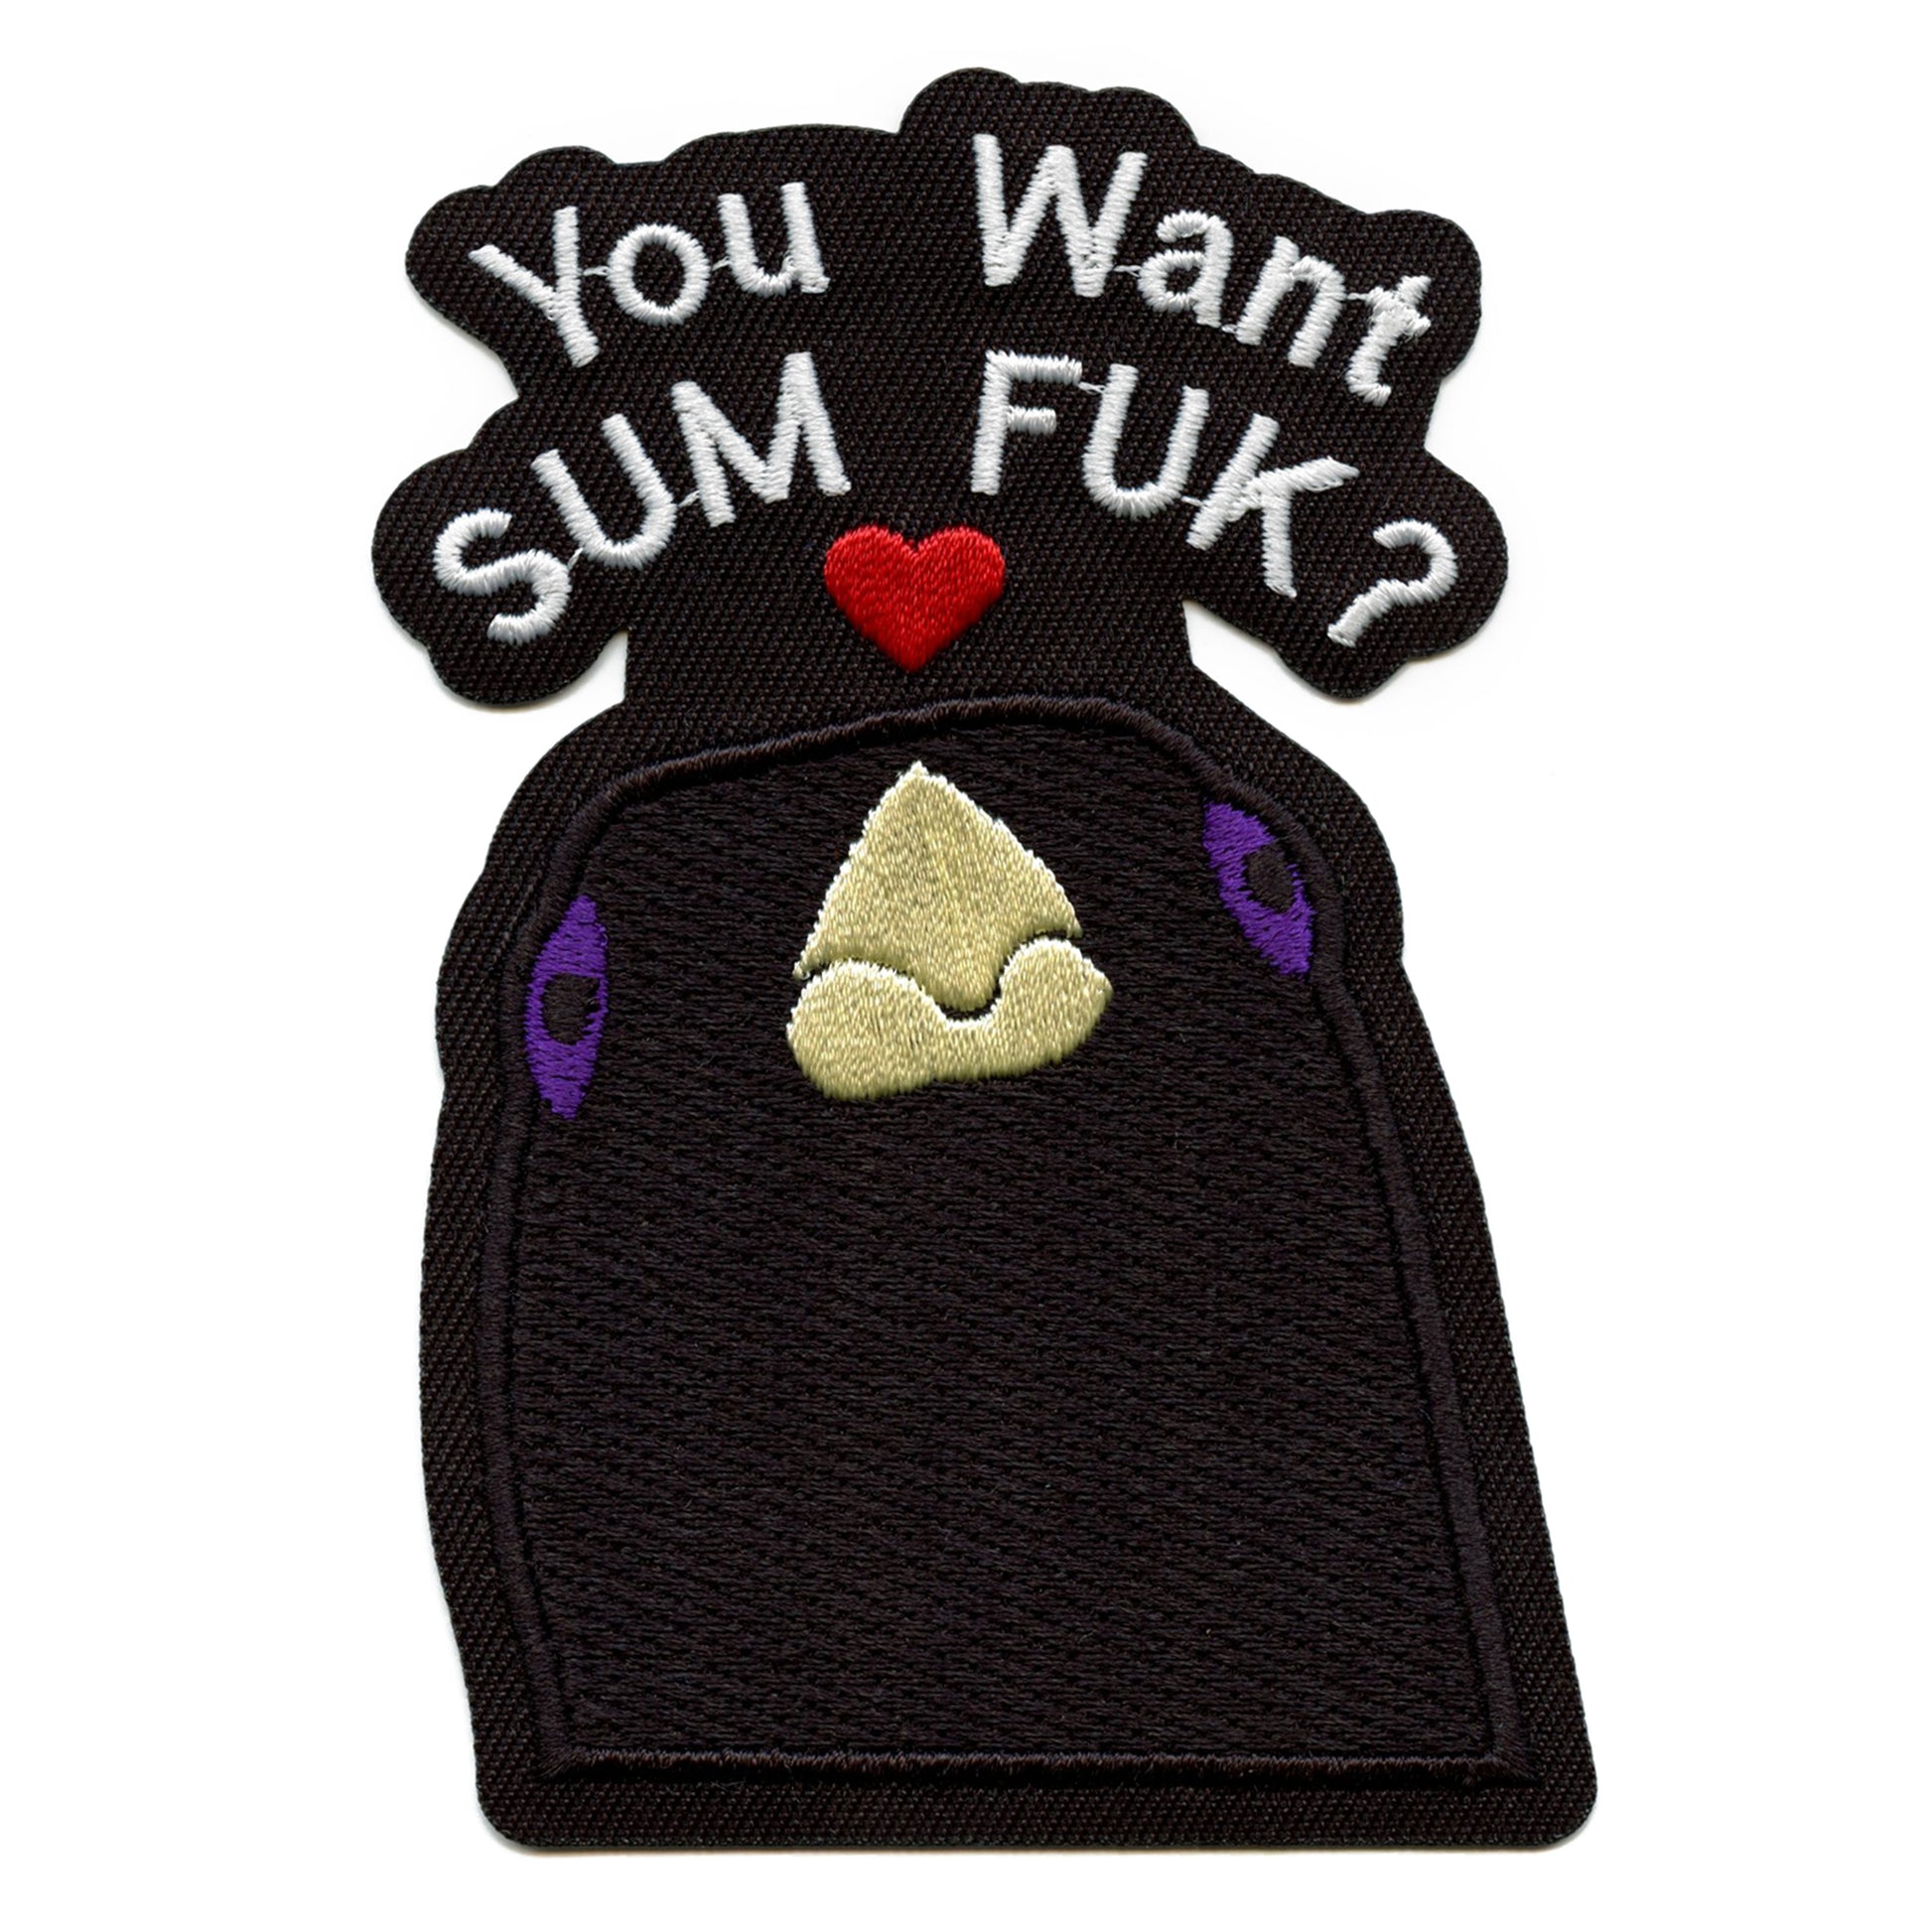 You Want Sum Fuk? Patch Bird Lemme Smash Embroidered Iron On 